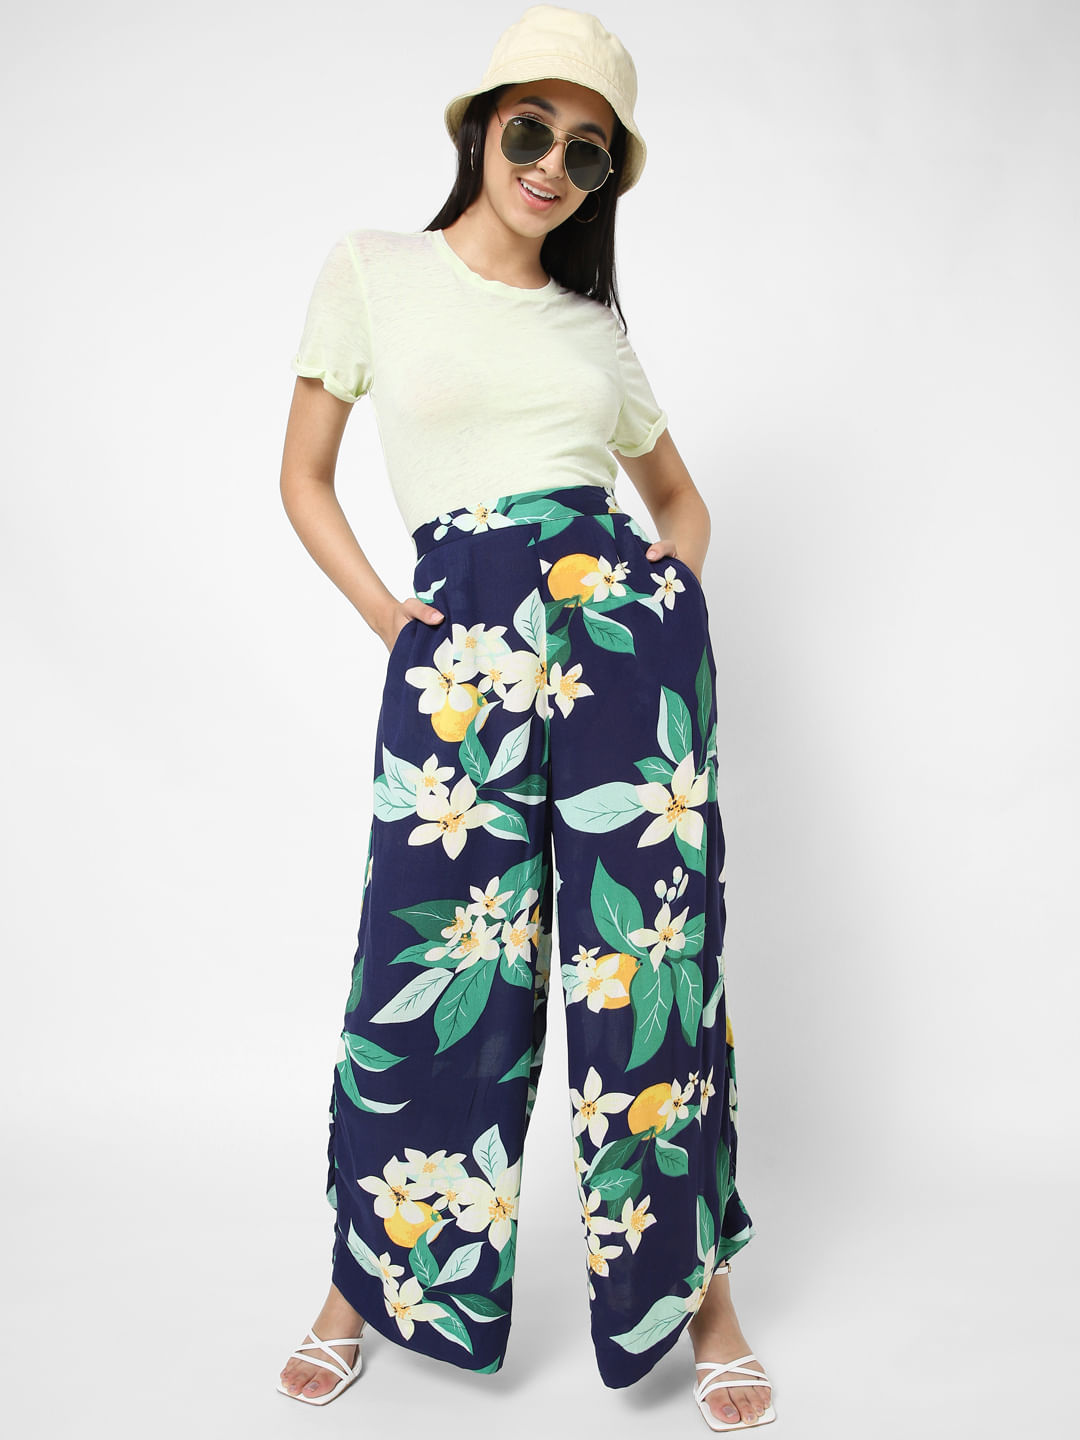 The Cutest Floral Pants  Floral pants Floral pants outfit Bollywood  outfits